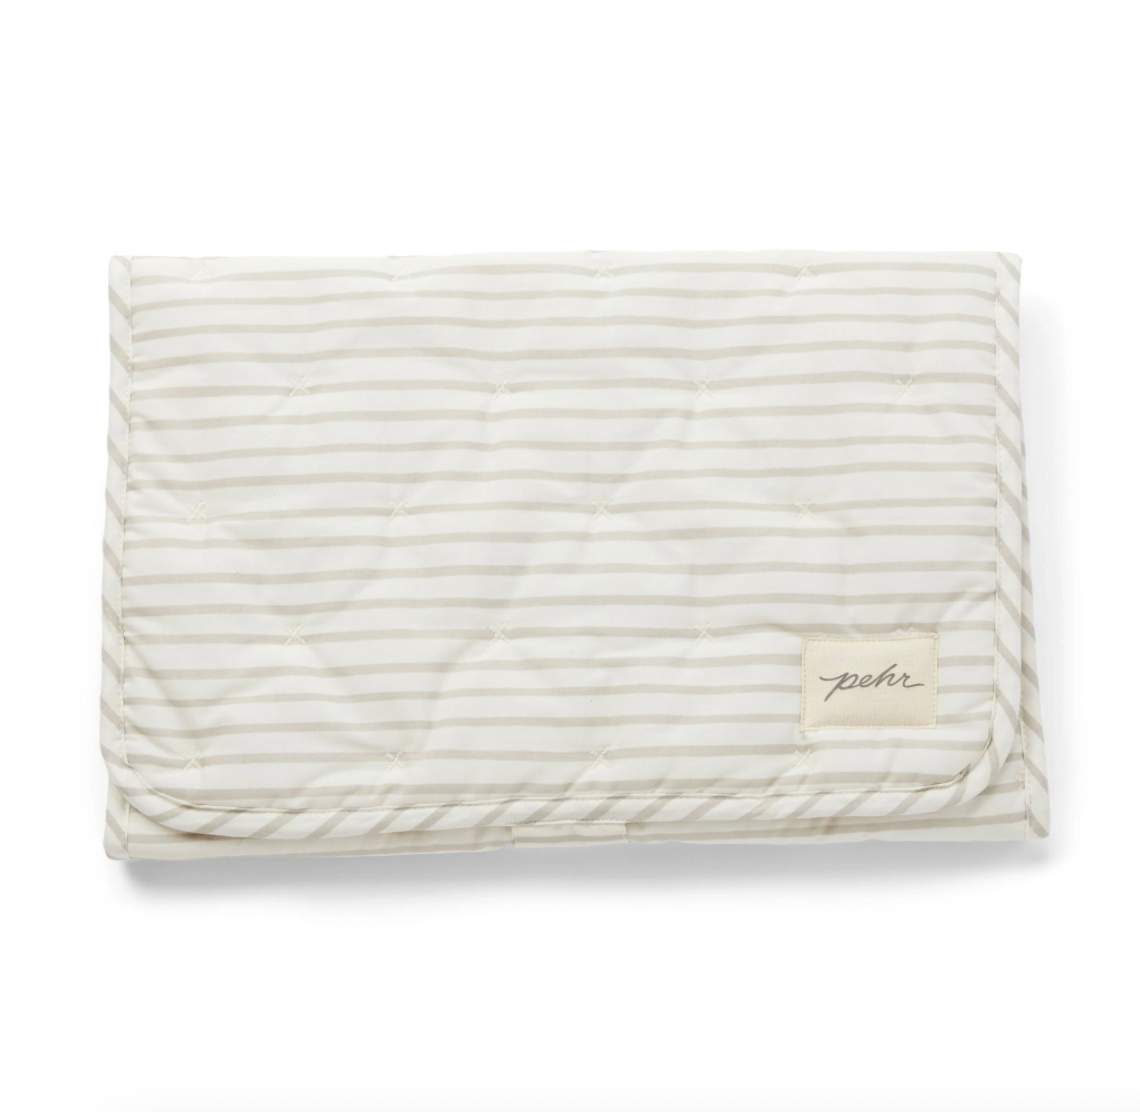 Striped On the Go Portable Changing Pad